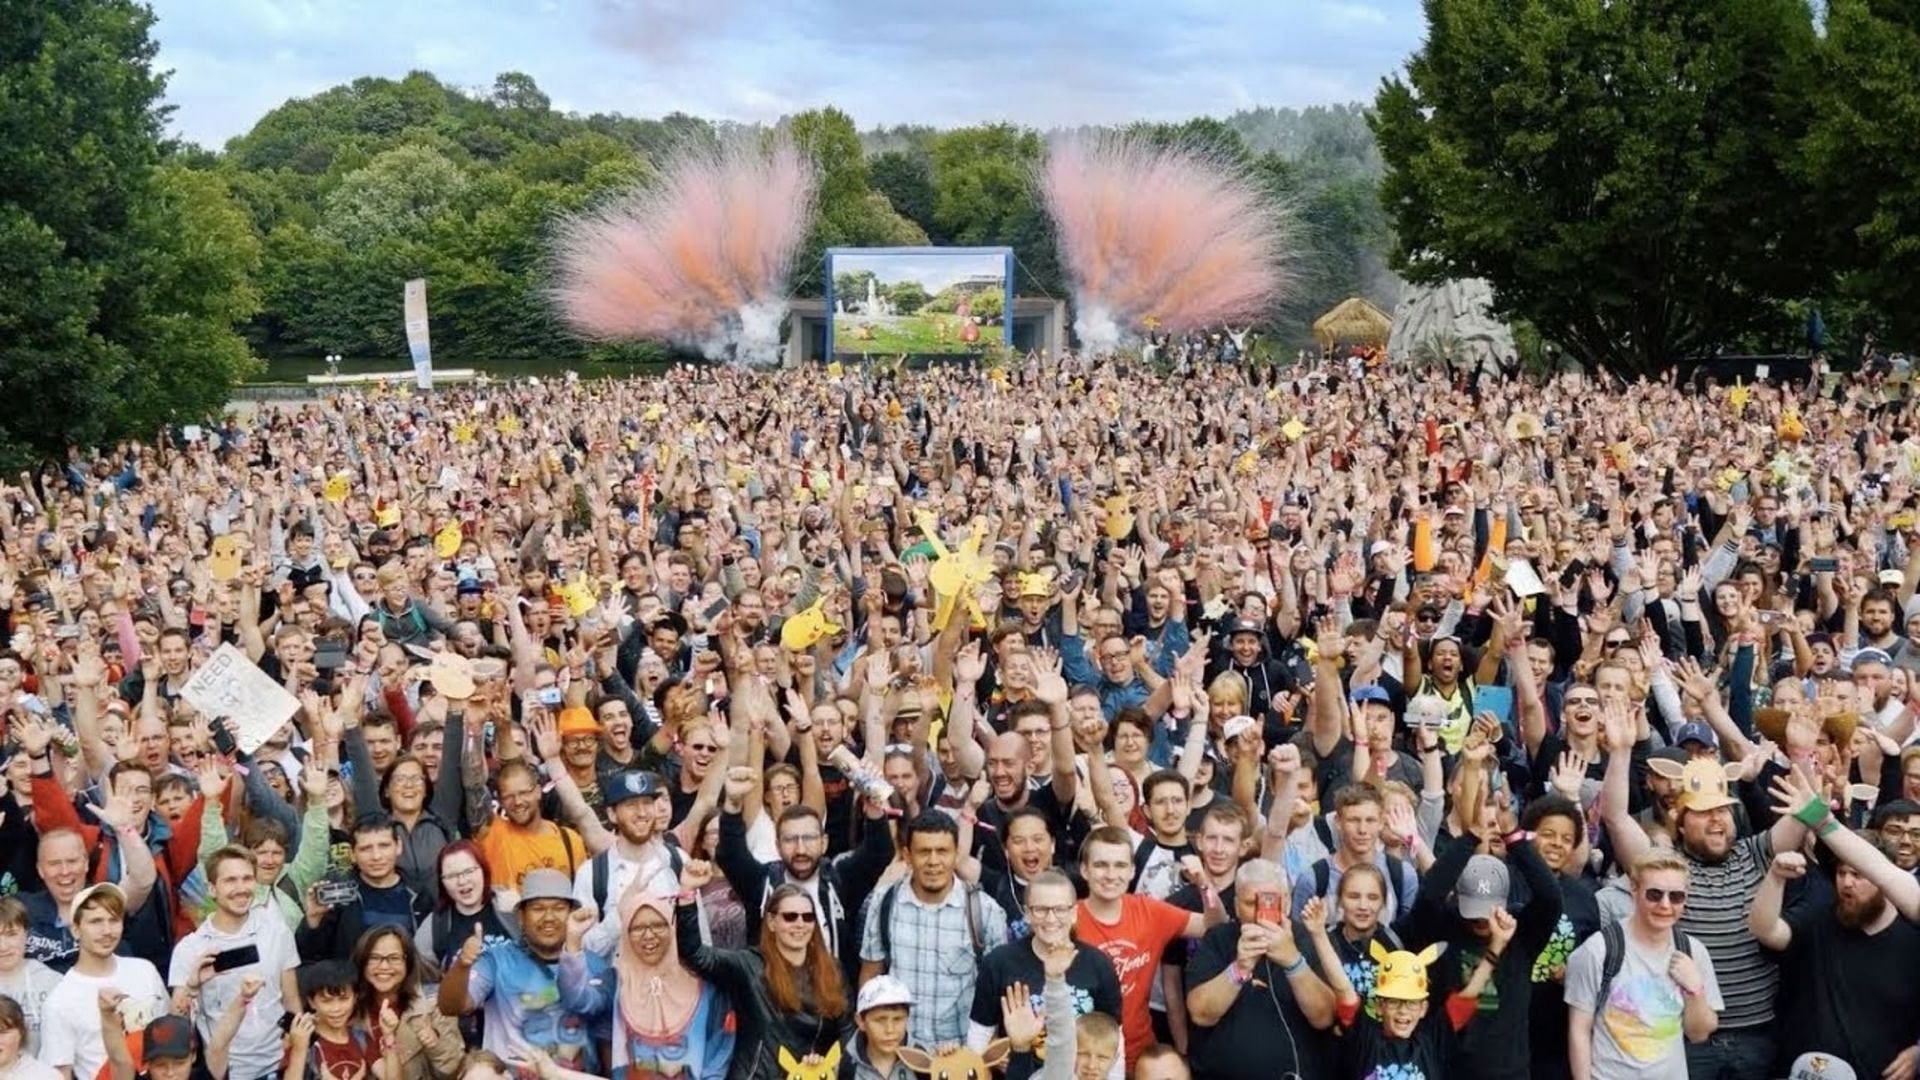 The crowd at the previous European live event hosted in Dortmund, Germany (Image via Niantic)